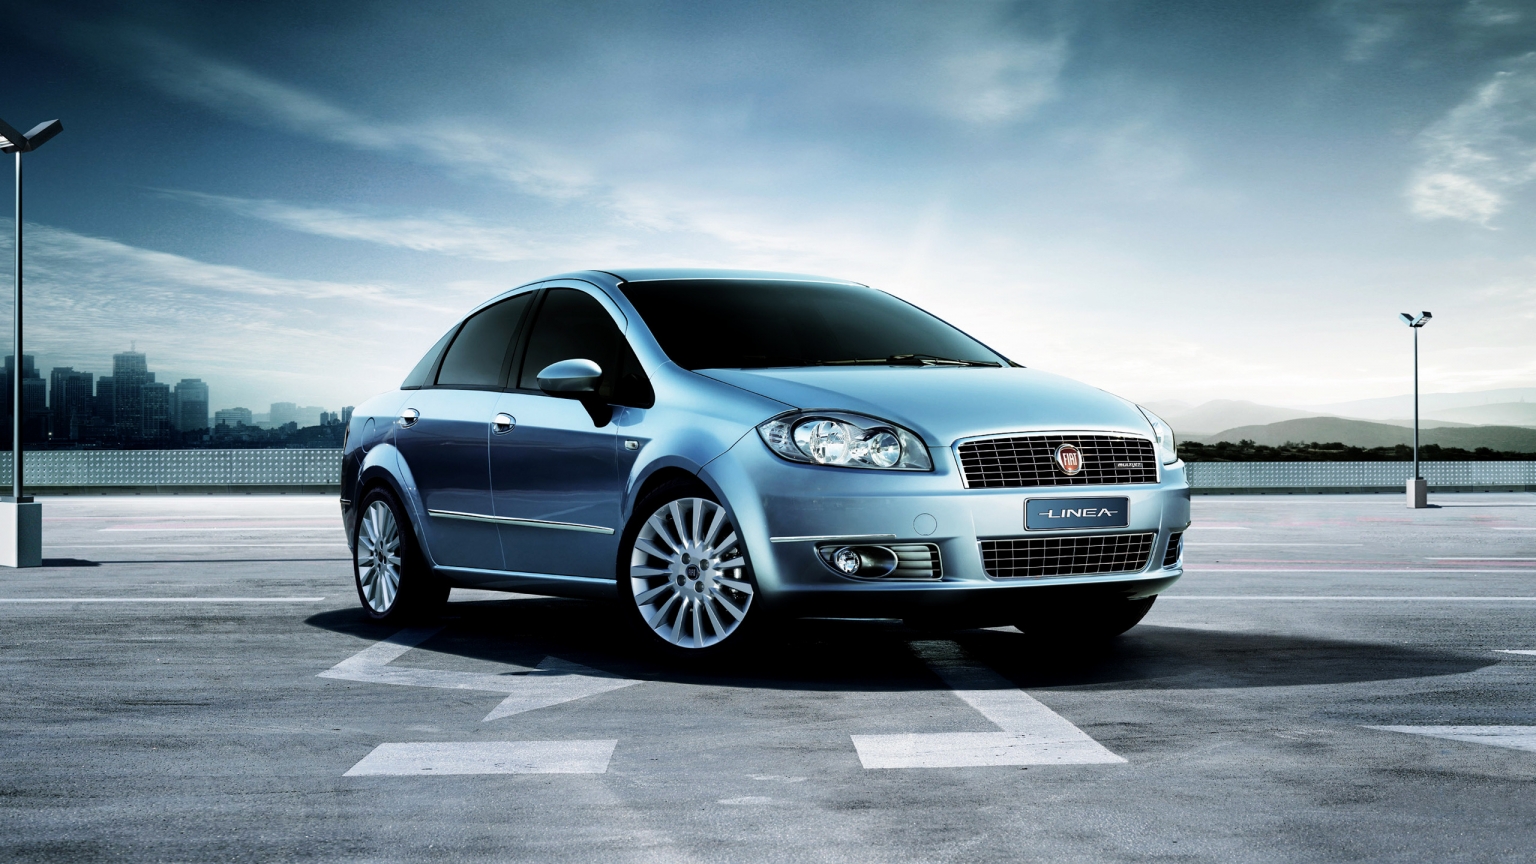 Fiat Linea 2009 for 1536 x 864 HDTV resolution